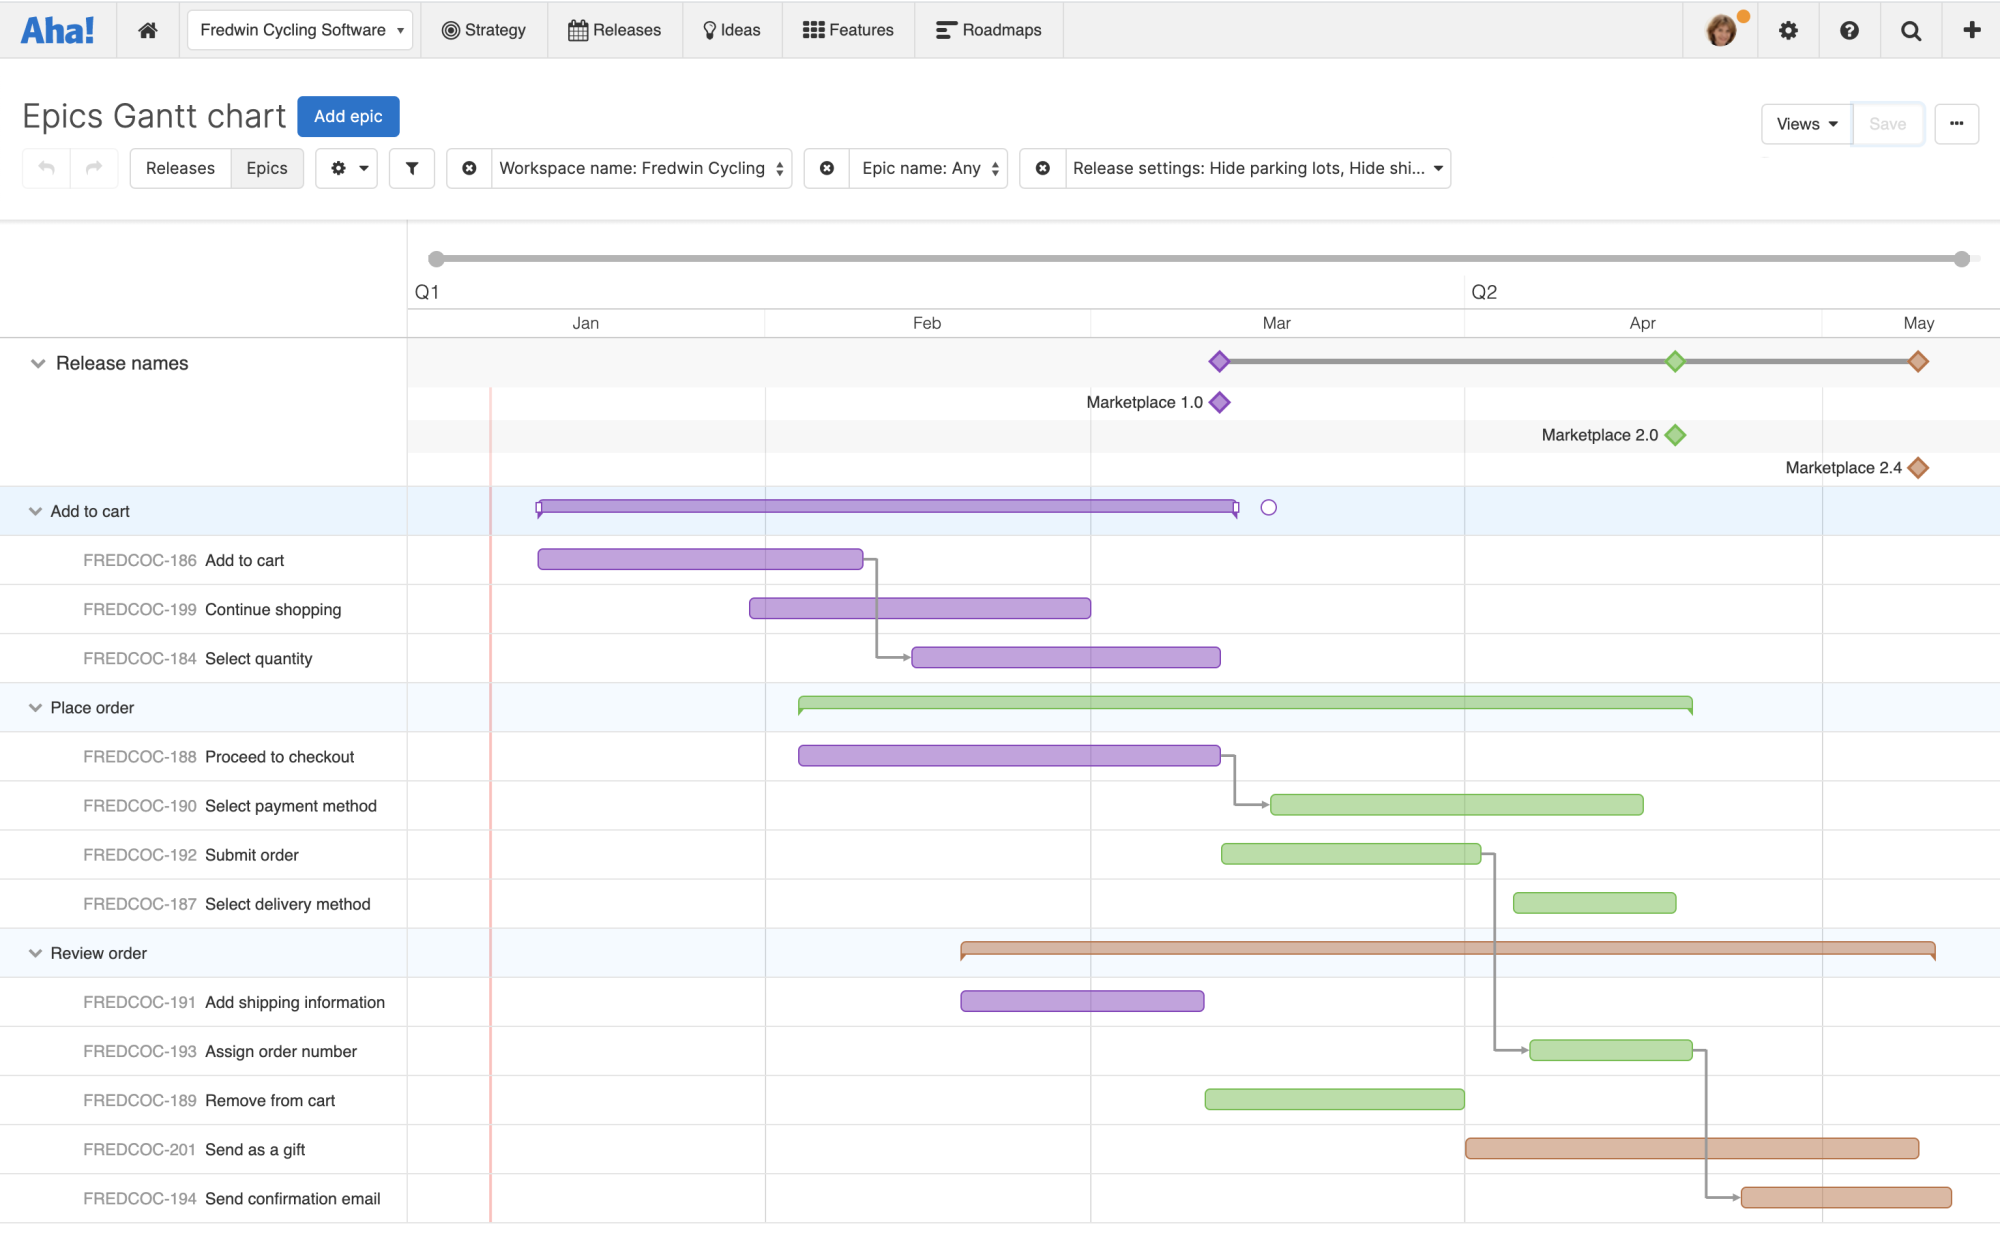 Epics gantt chart with releases, epics, and features